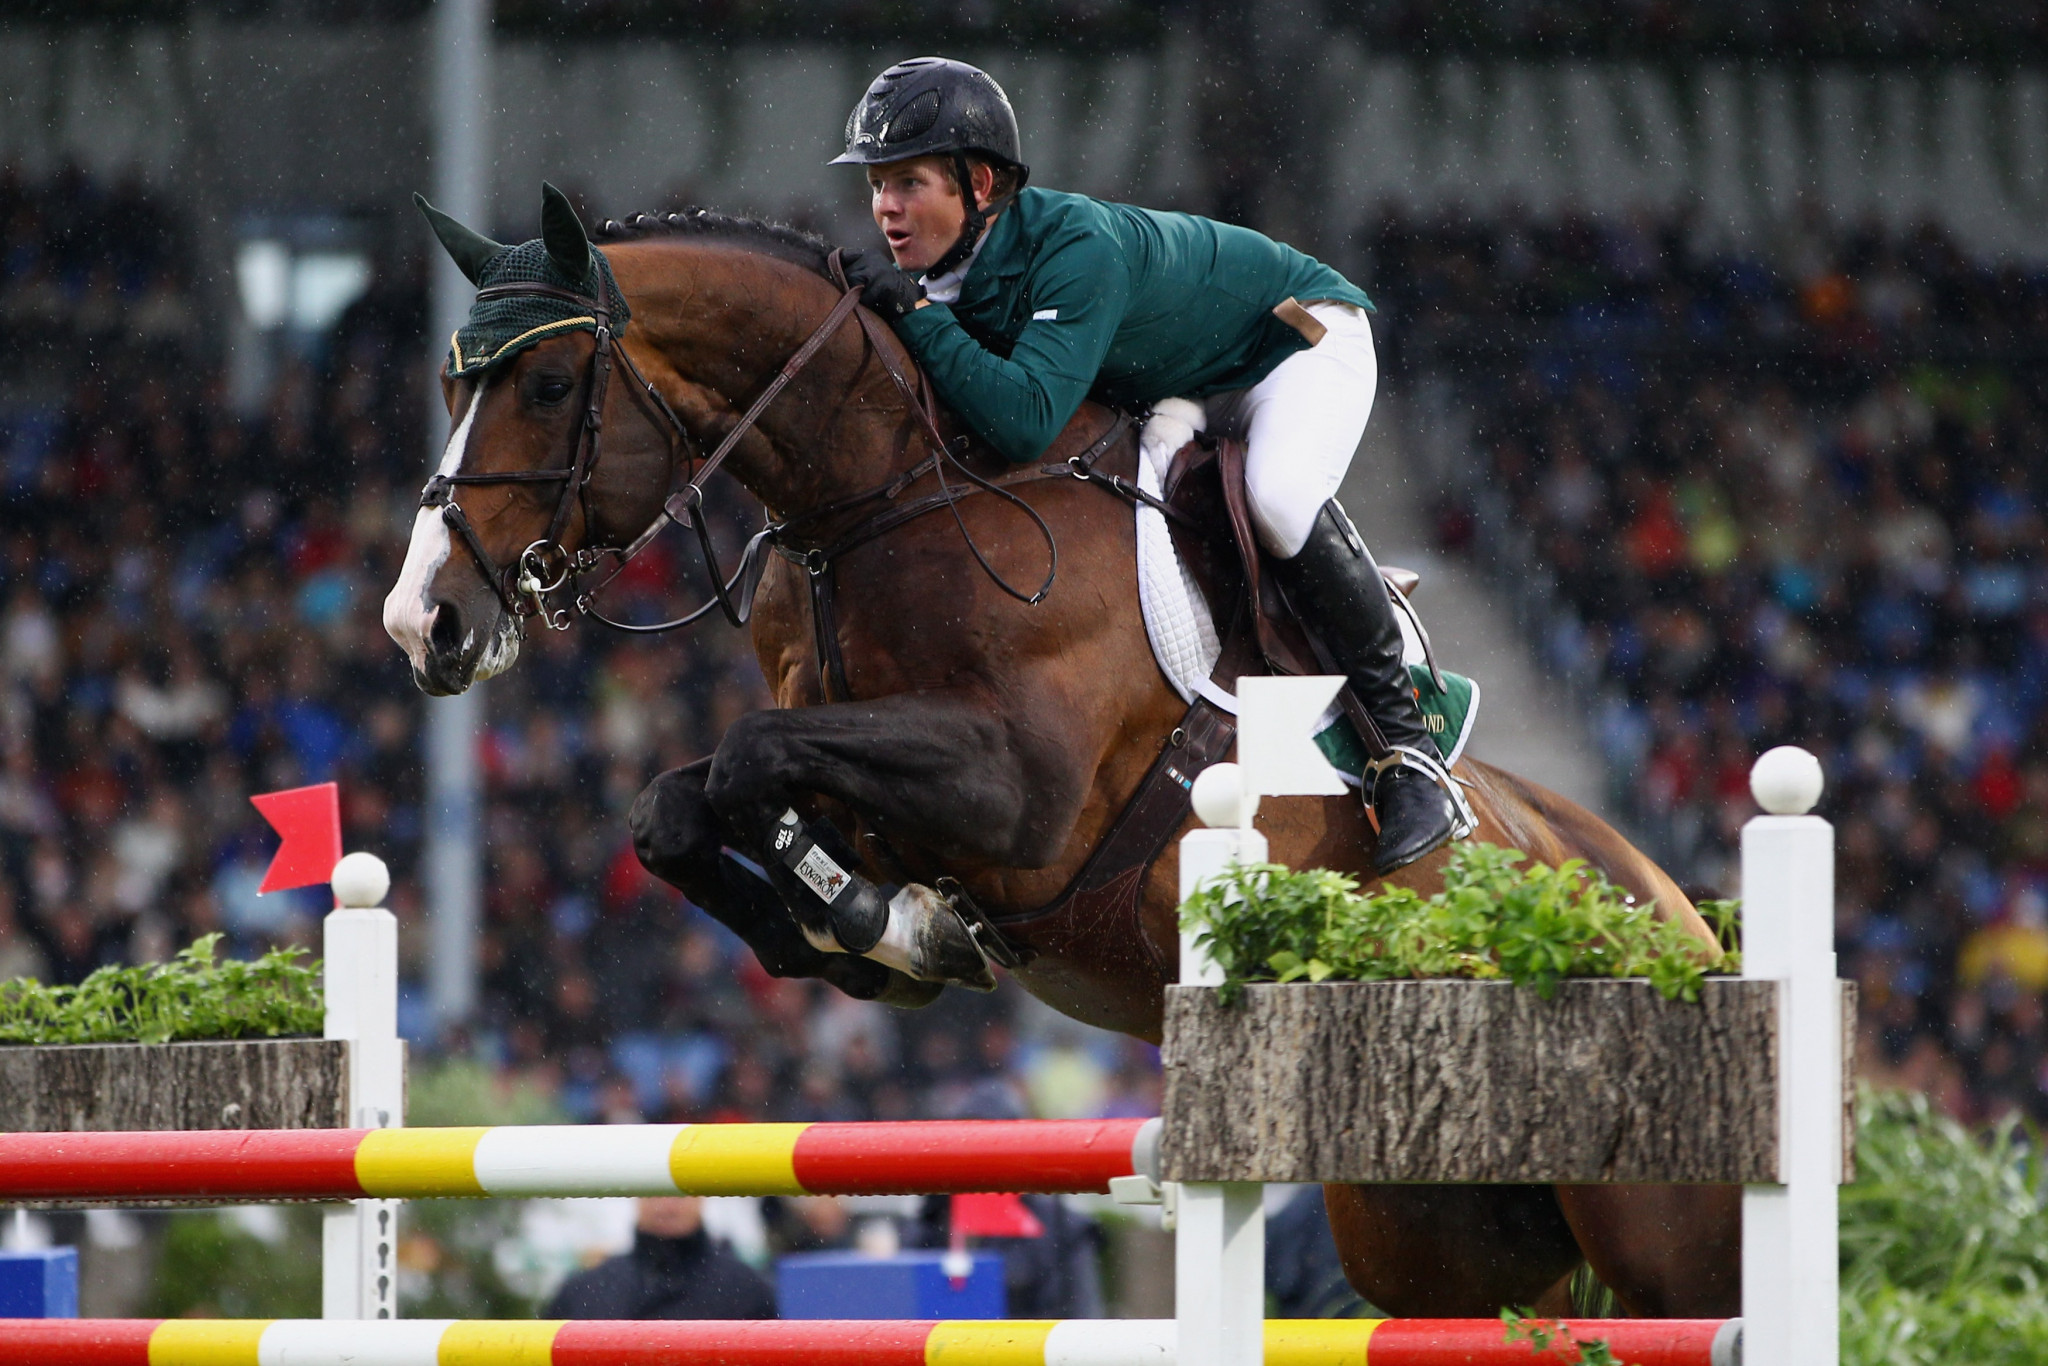 Ireland's Shane Sweetnam finished in the runners-up spot ©Getty Images